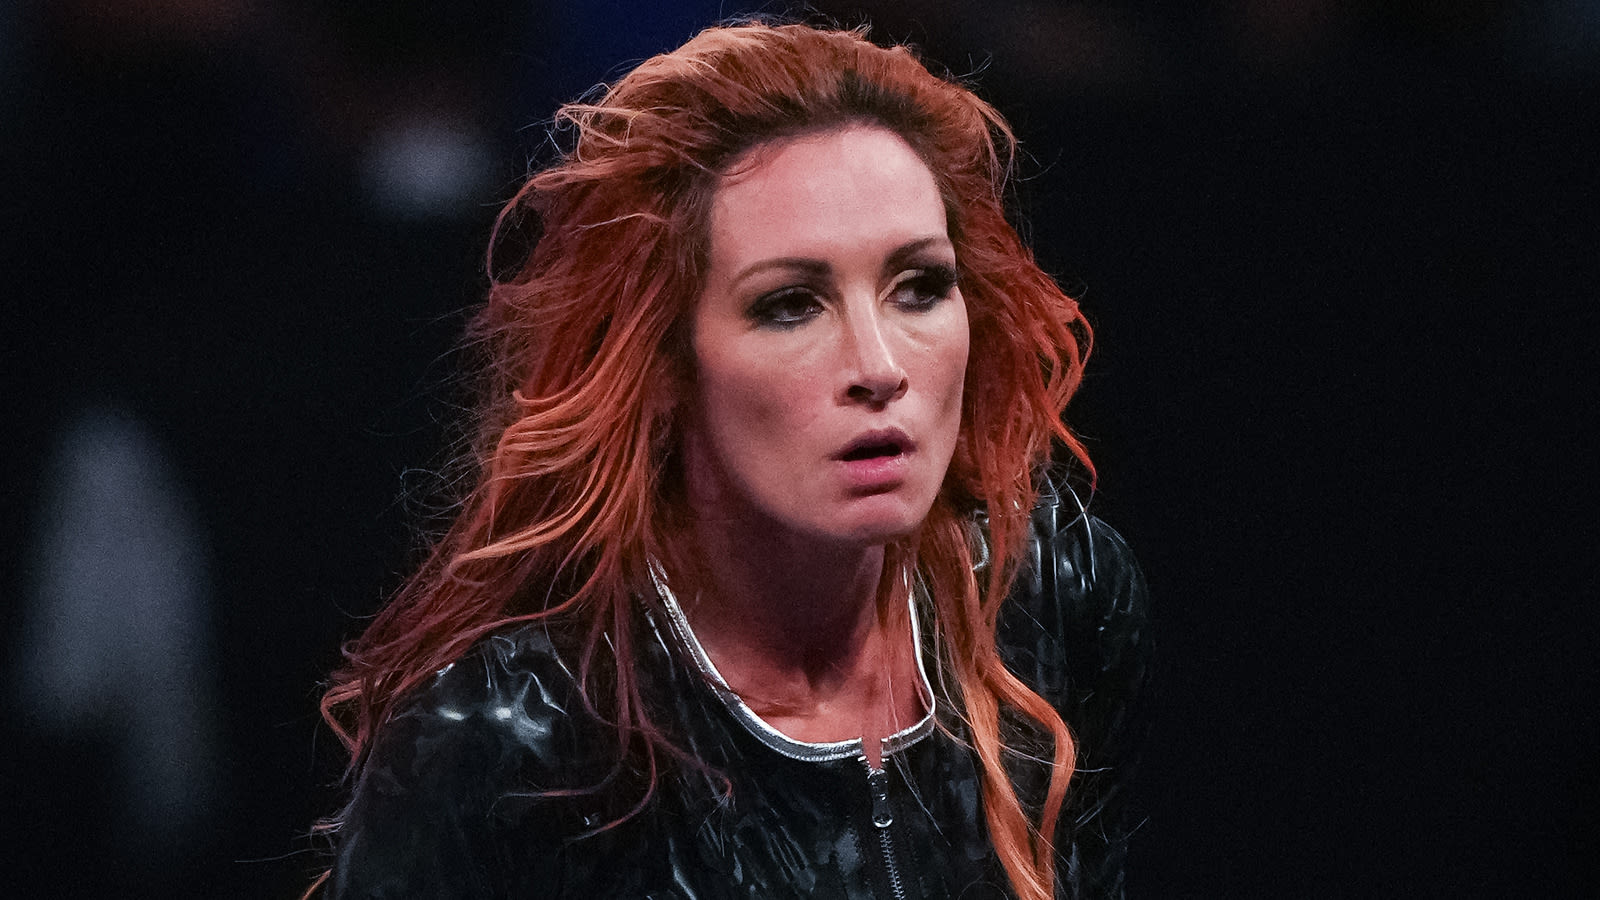 Backstage Update On Becky Lynch's WWE Status Amidst Reported Contract Negotiations - Wrestling Inc.